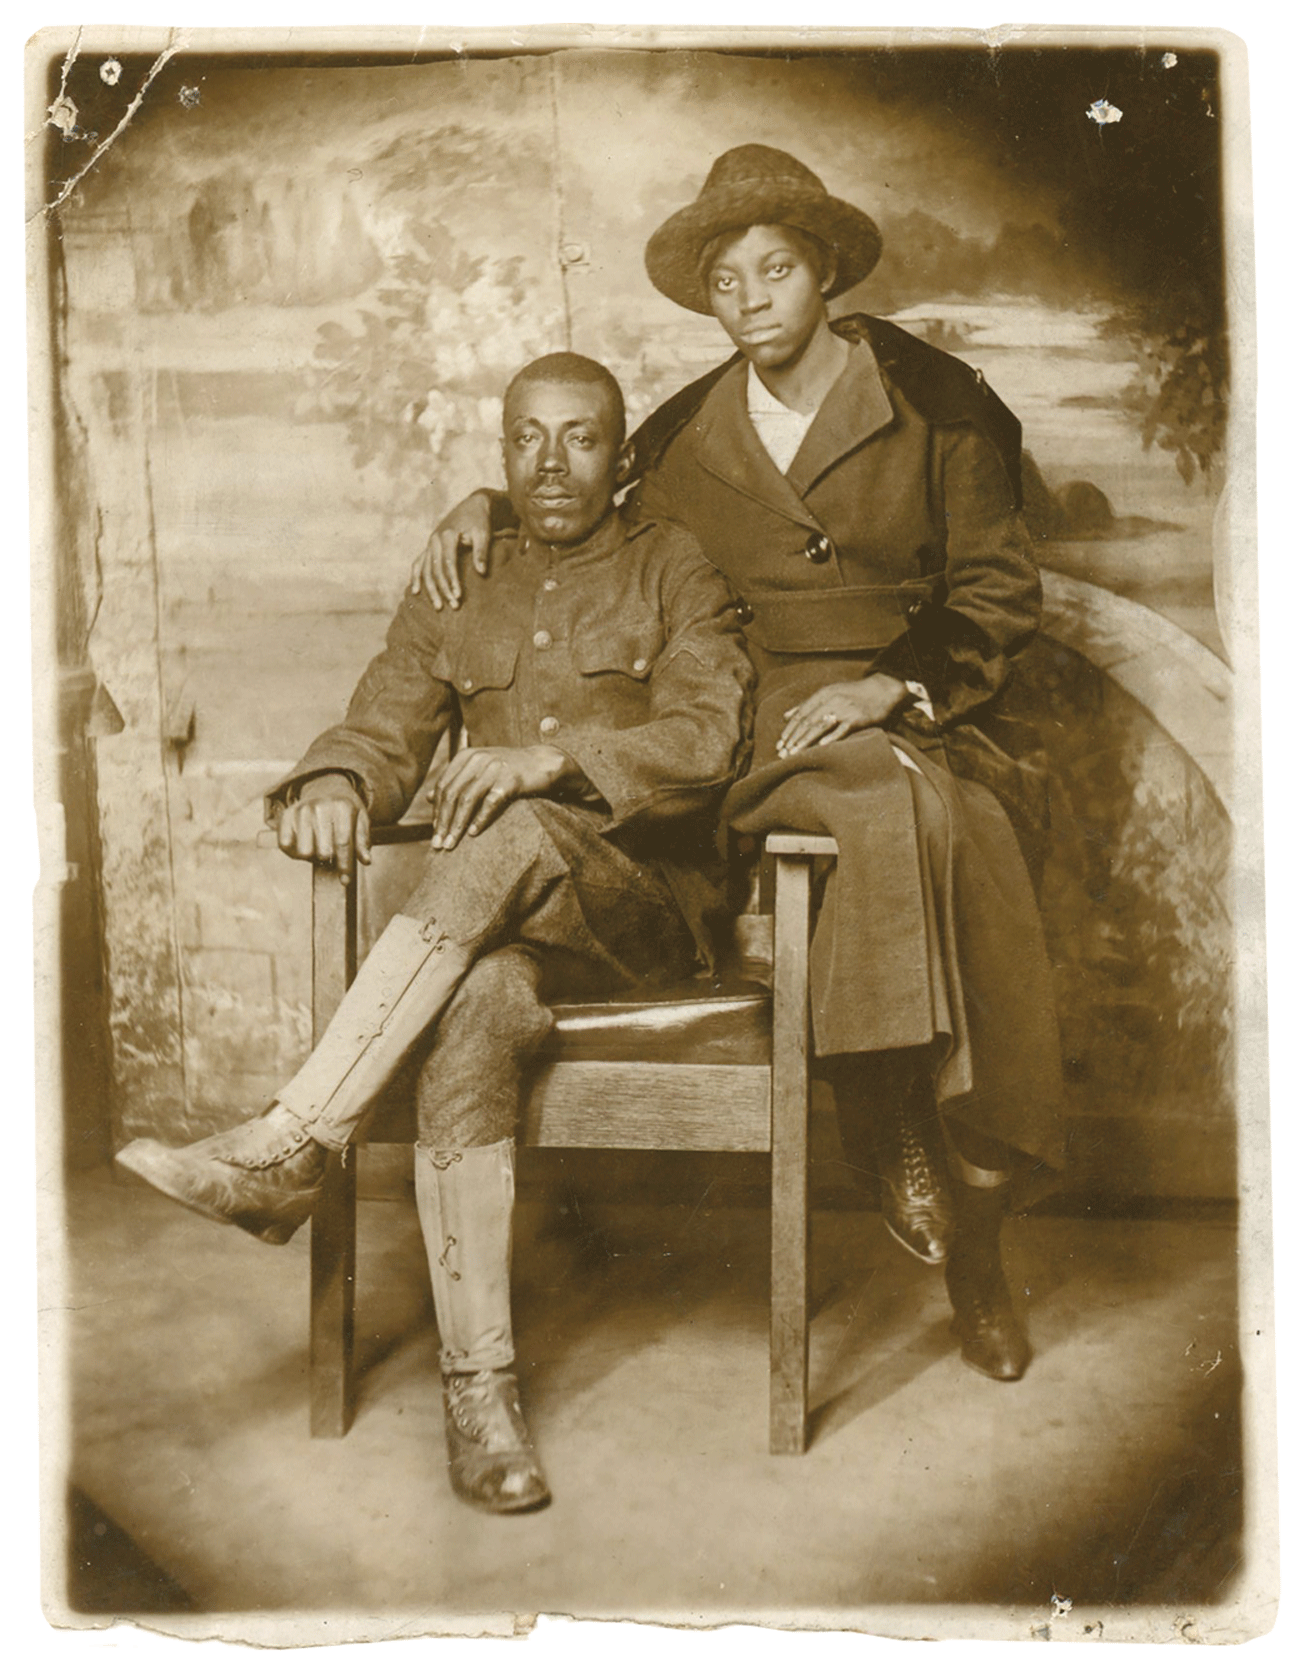 Historic image of early 20th century couple, man in uniform seated